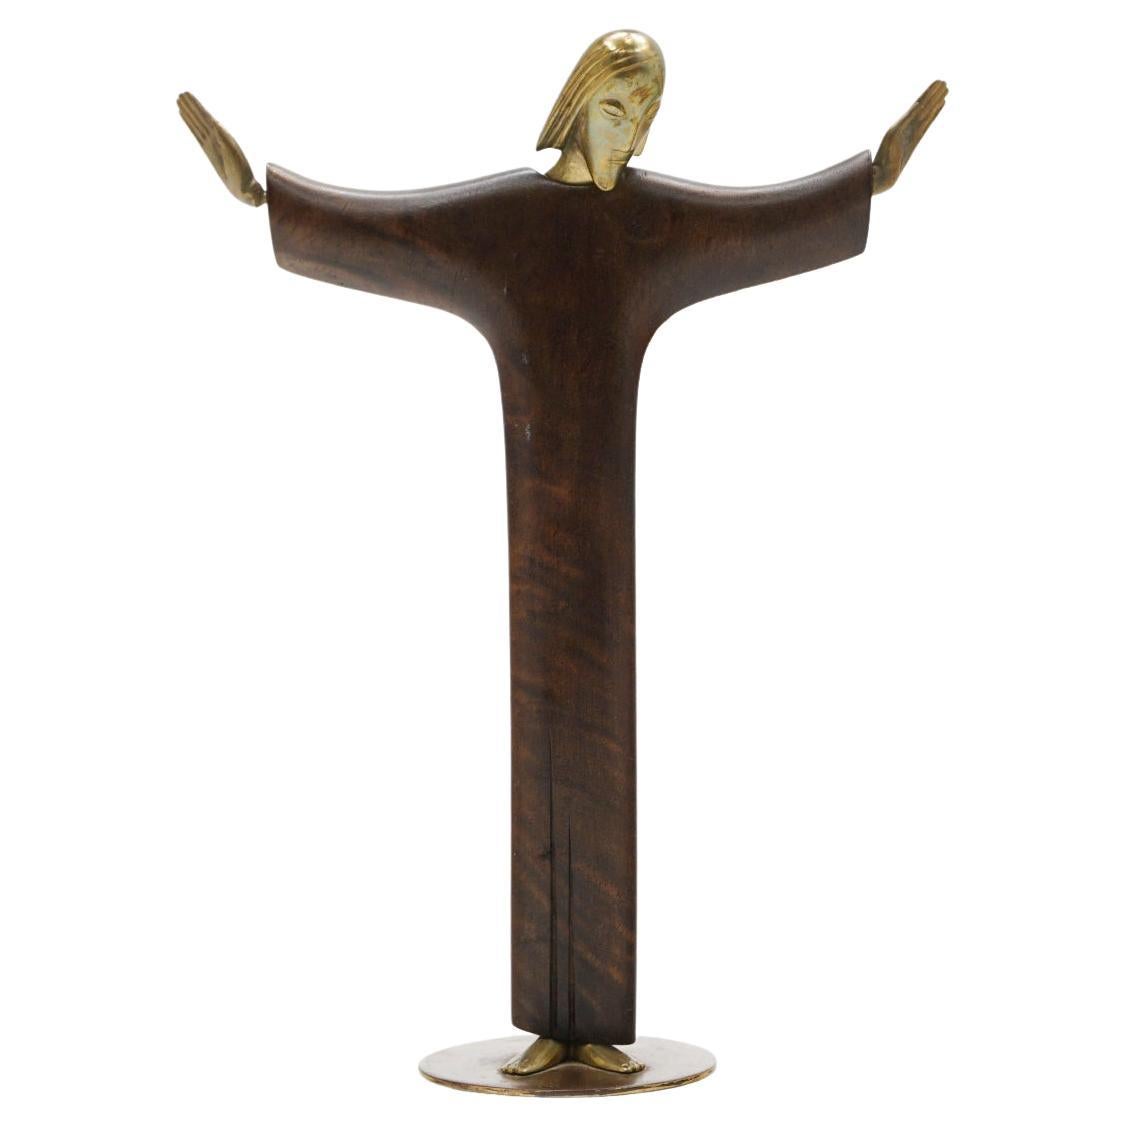 Untitled 'Christ' Sculpture by Karl Hagenauer, 1950, Rosewood and Bronze